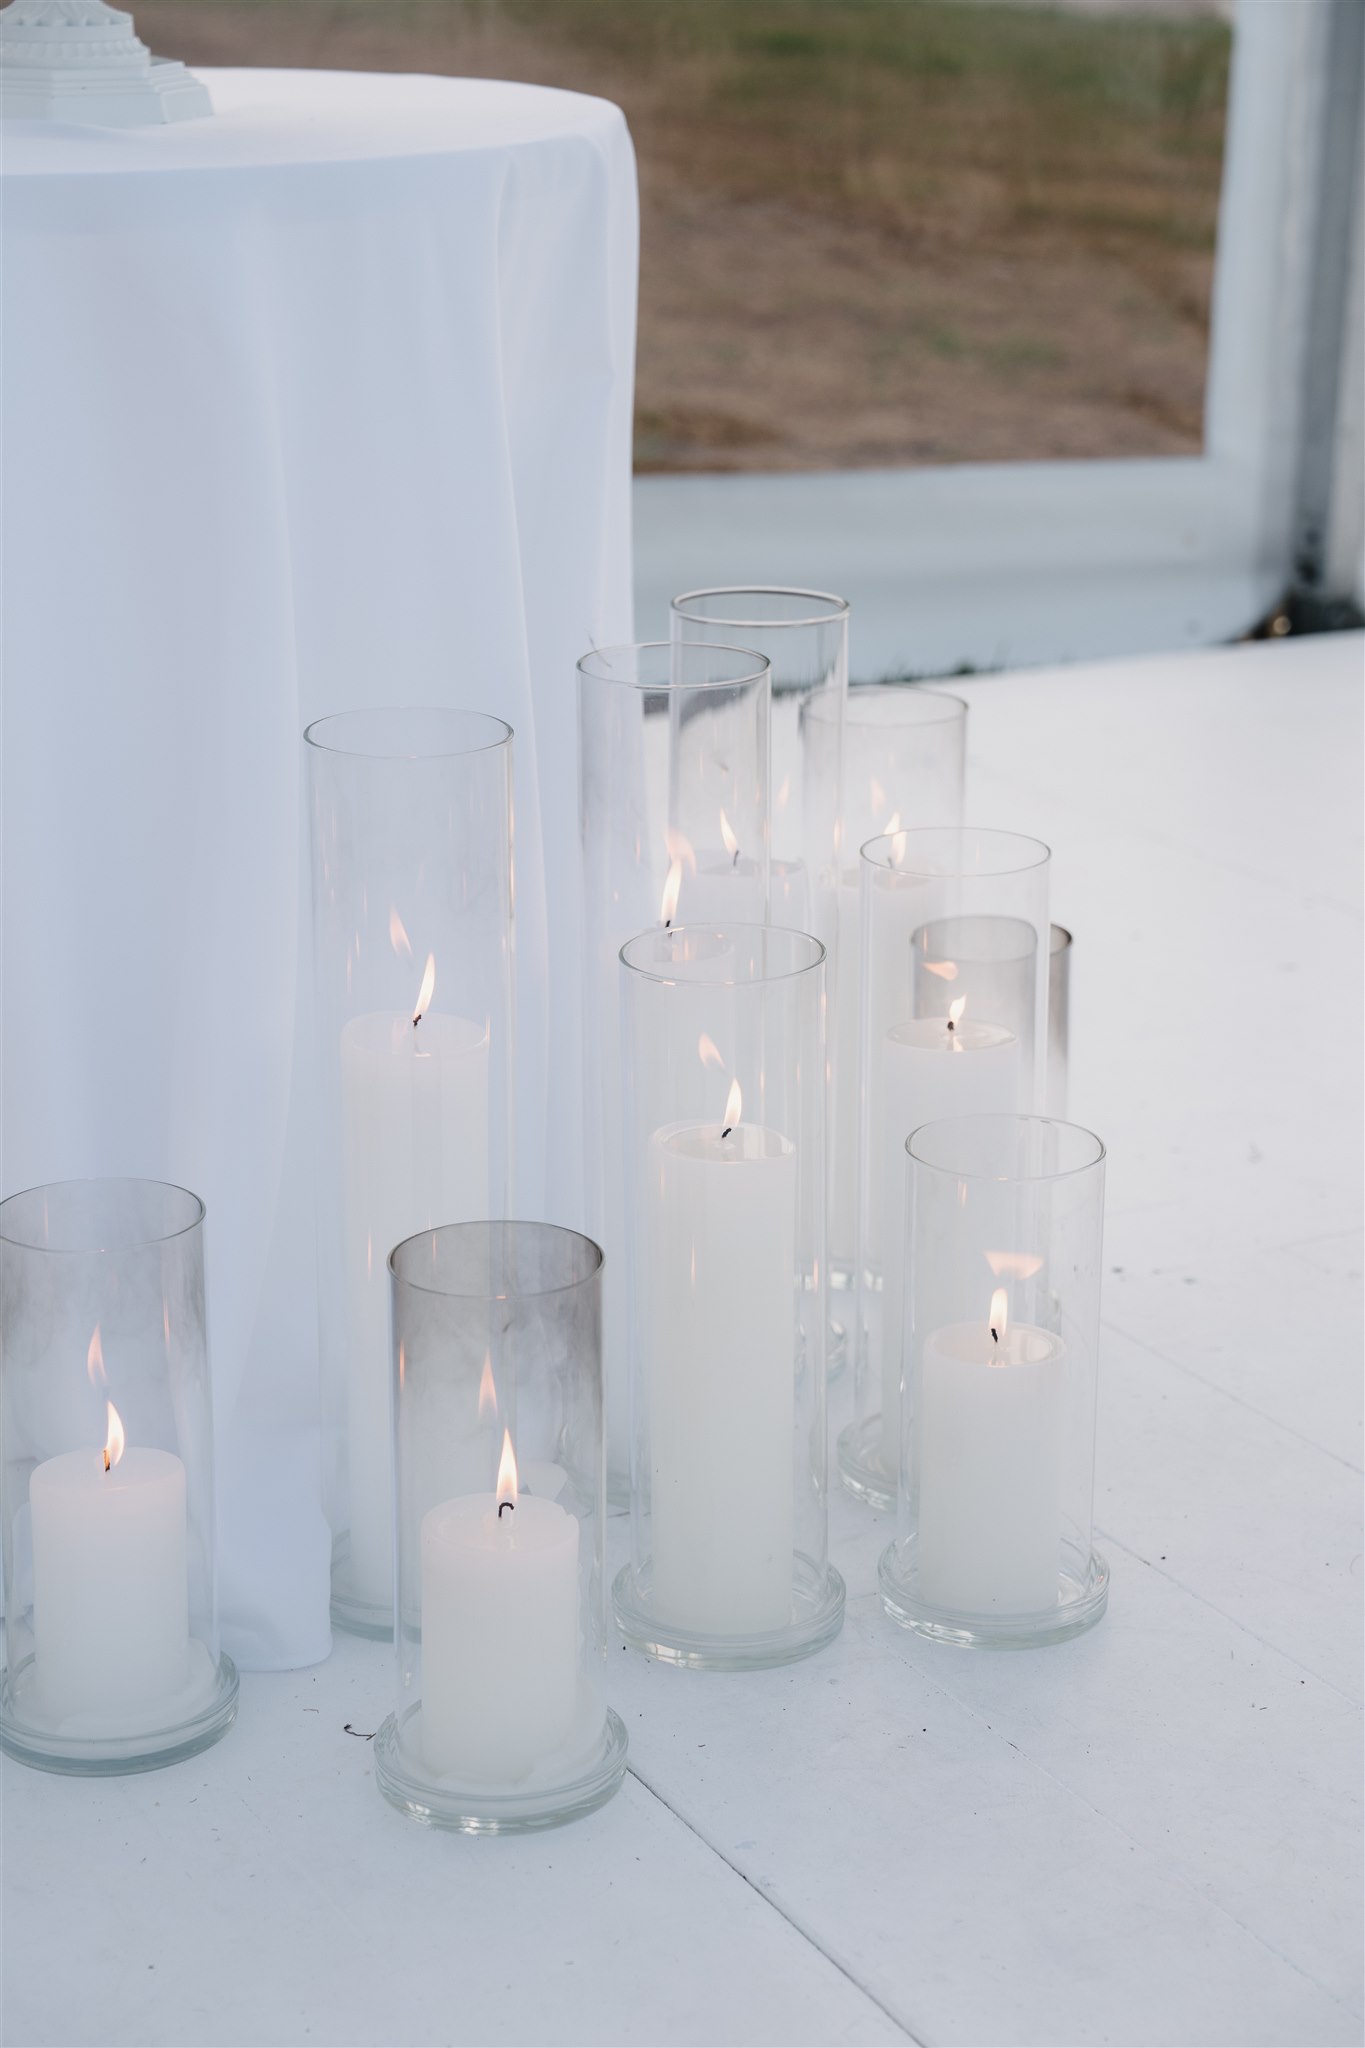 rent vases for candles auckland nz